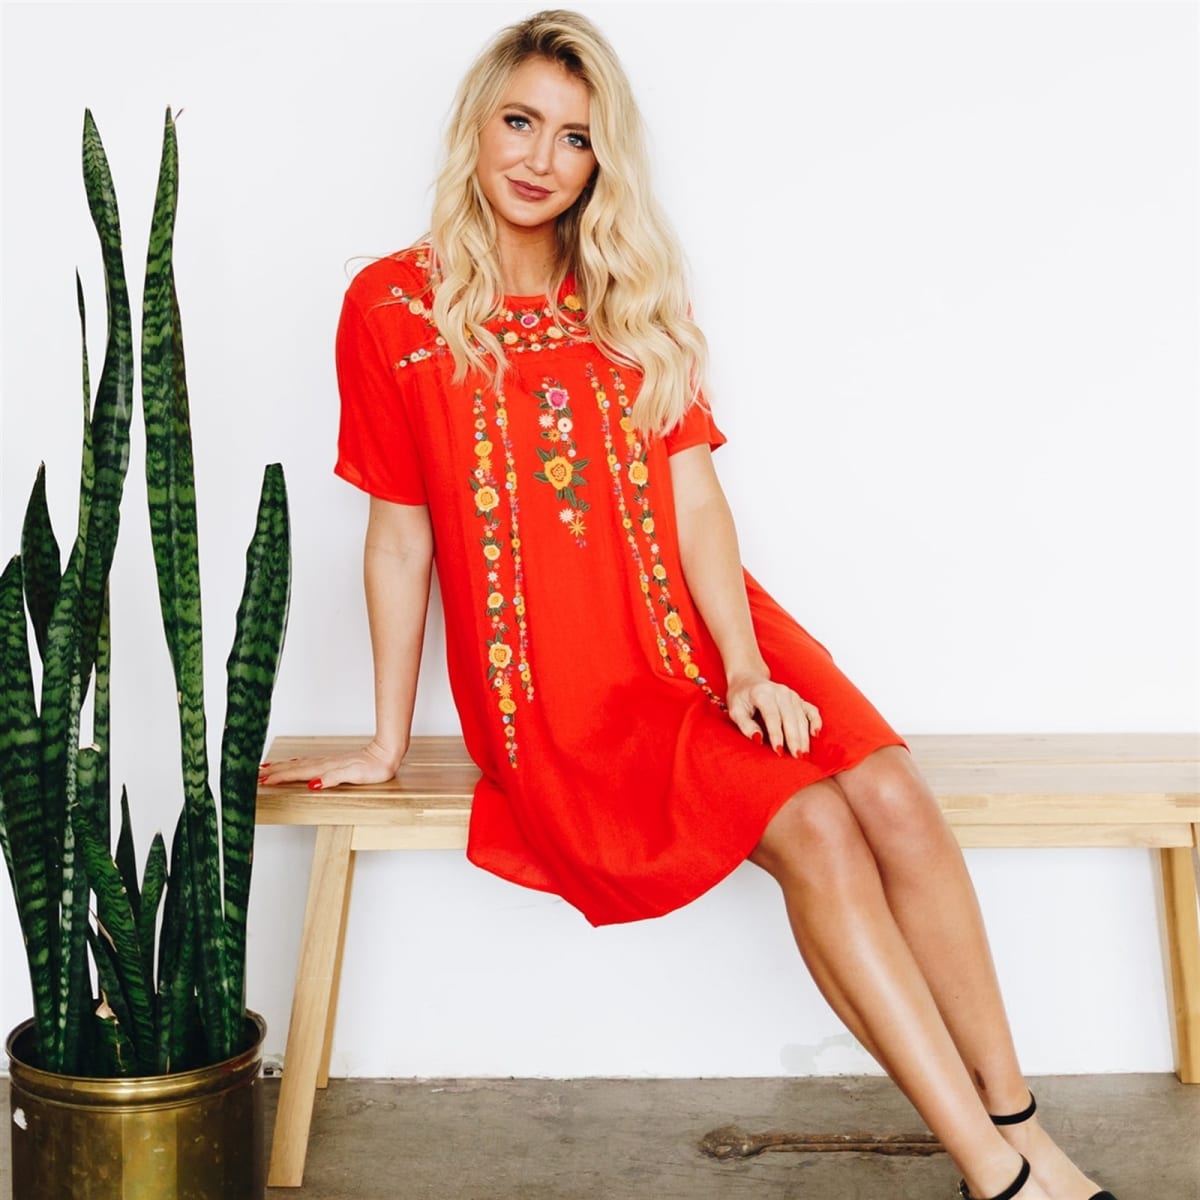 Embroidered Tee Dress – Only $27.99!